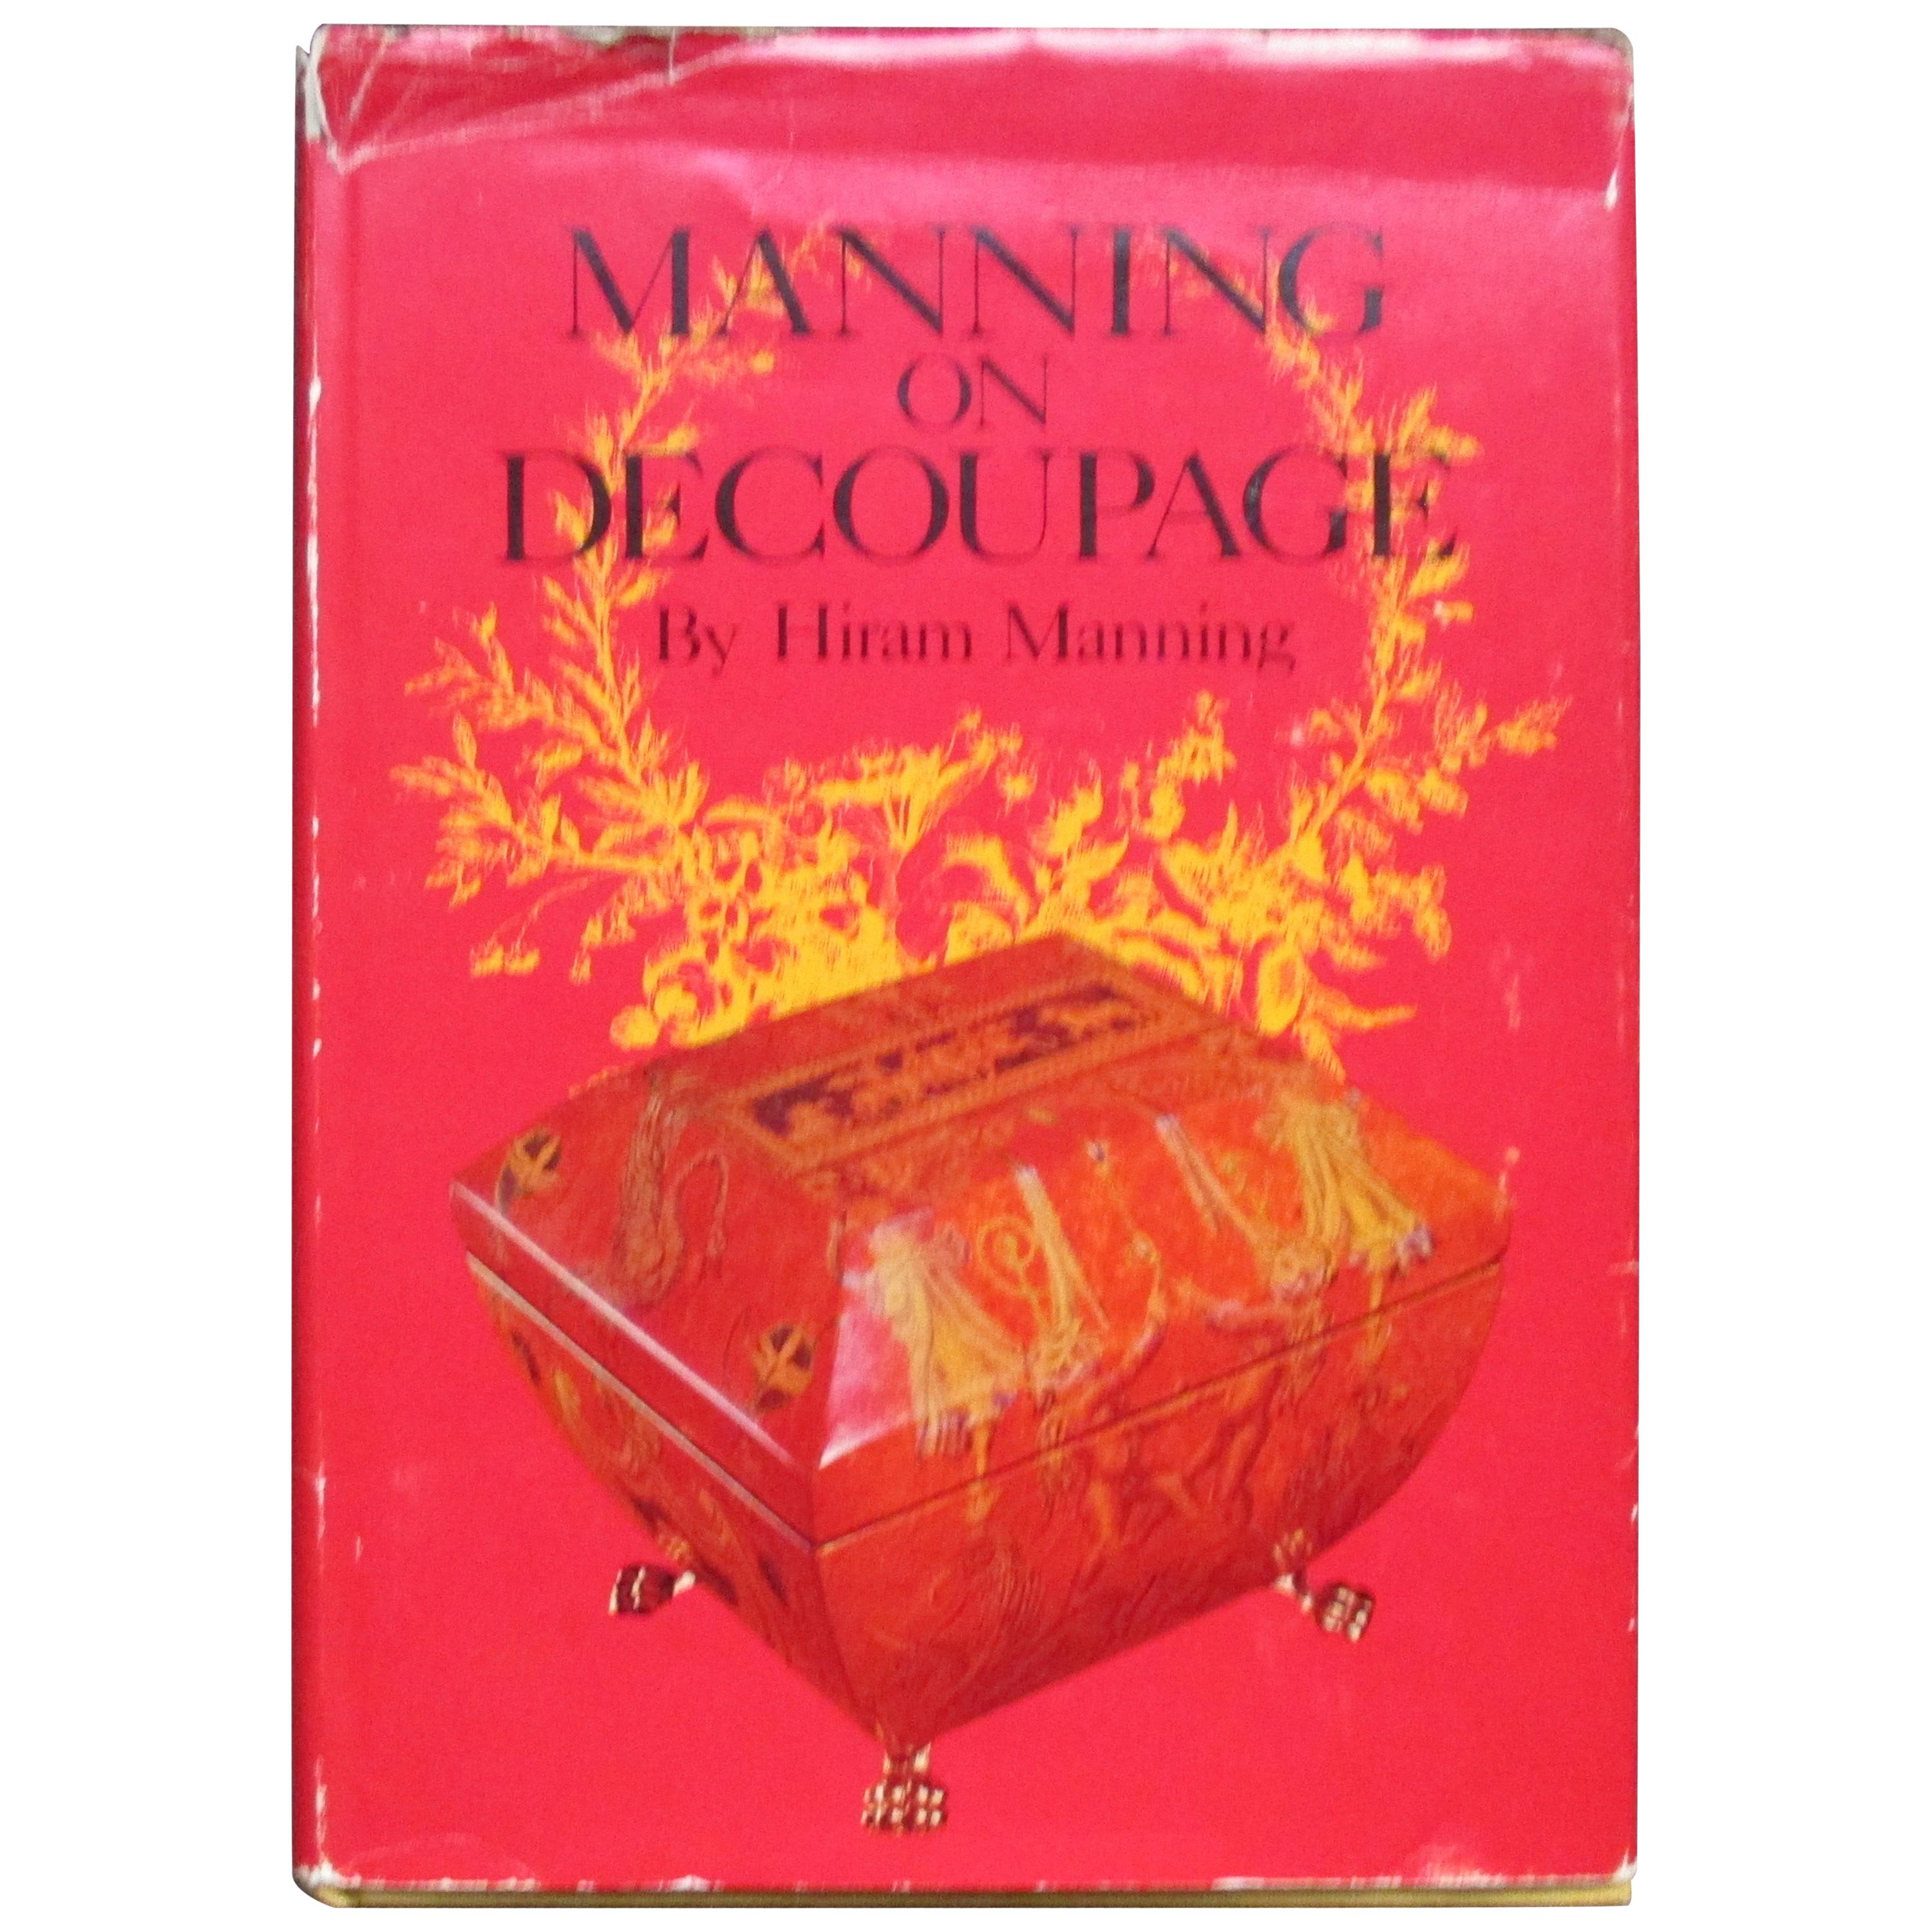 Manning on Decoupage Hardcover Decoration Book